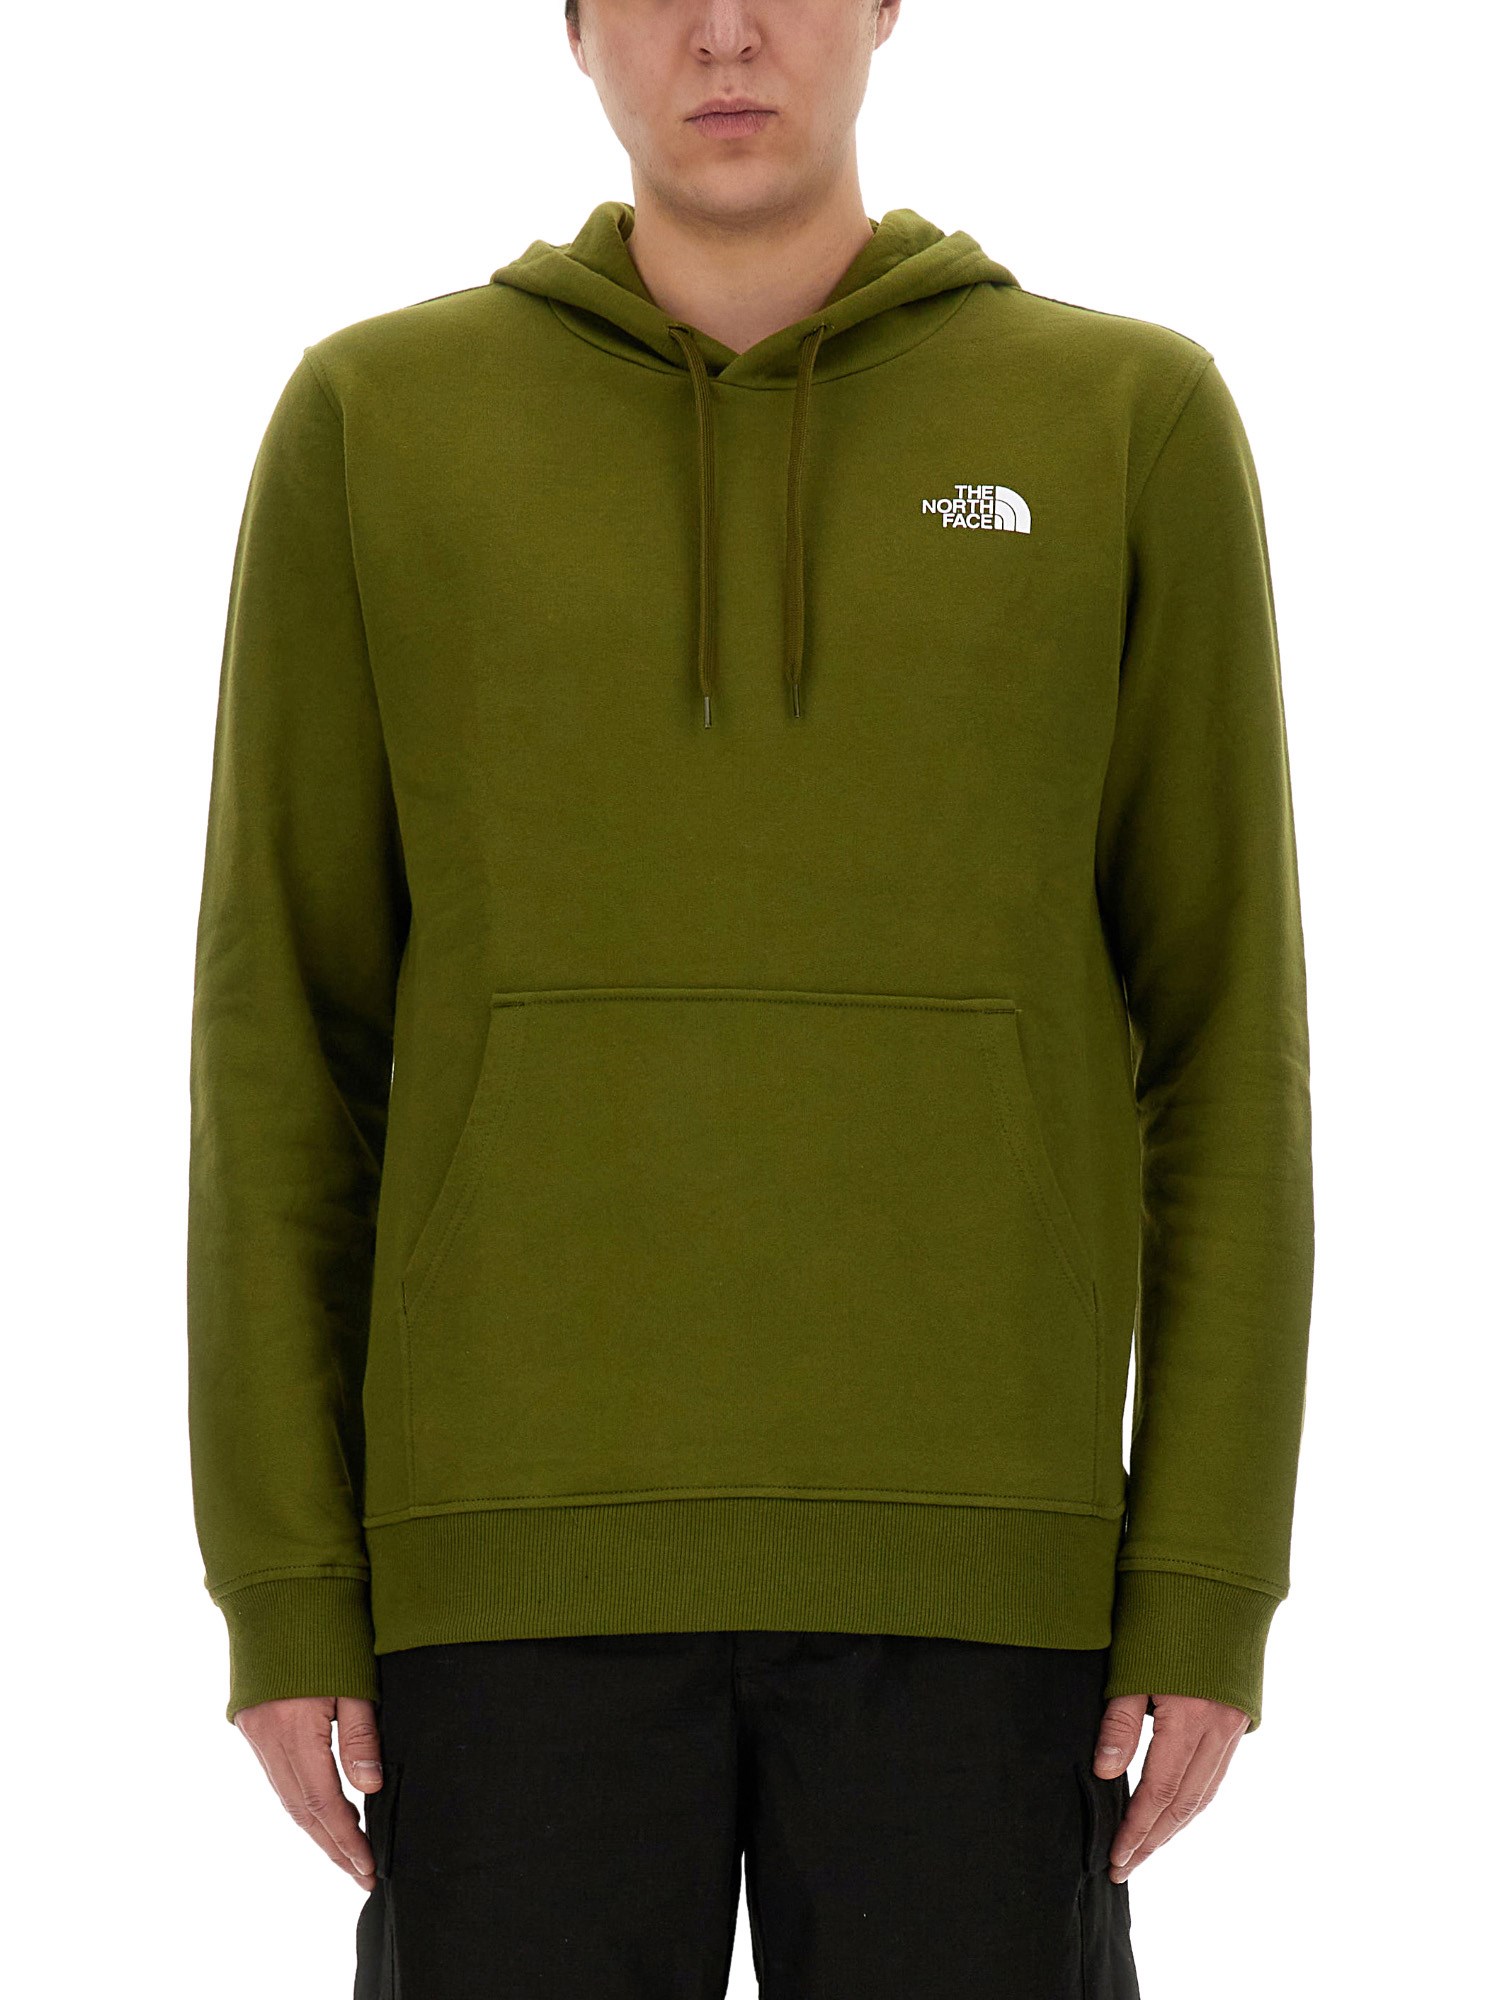 the north face sweatshirt with logo